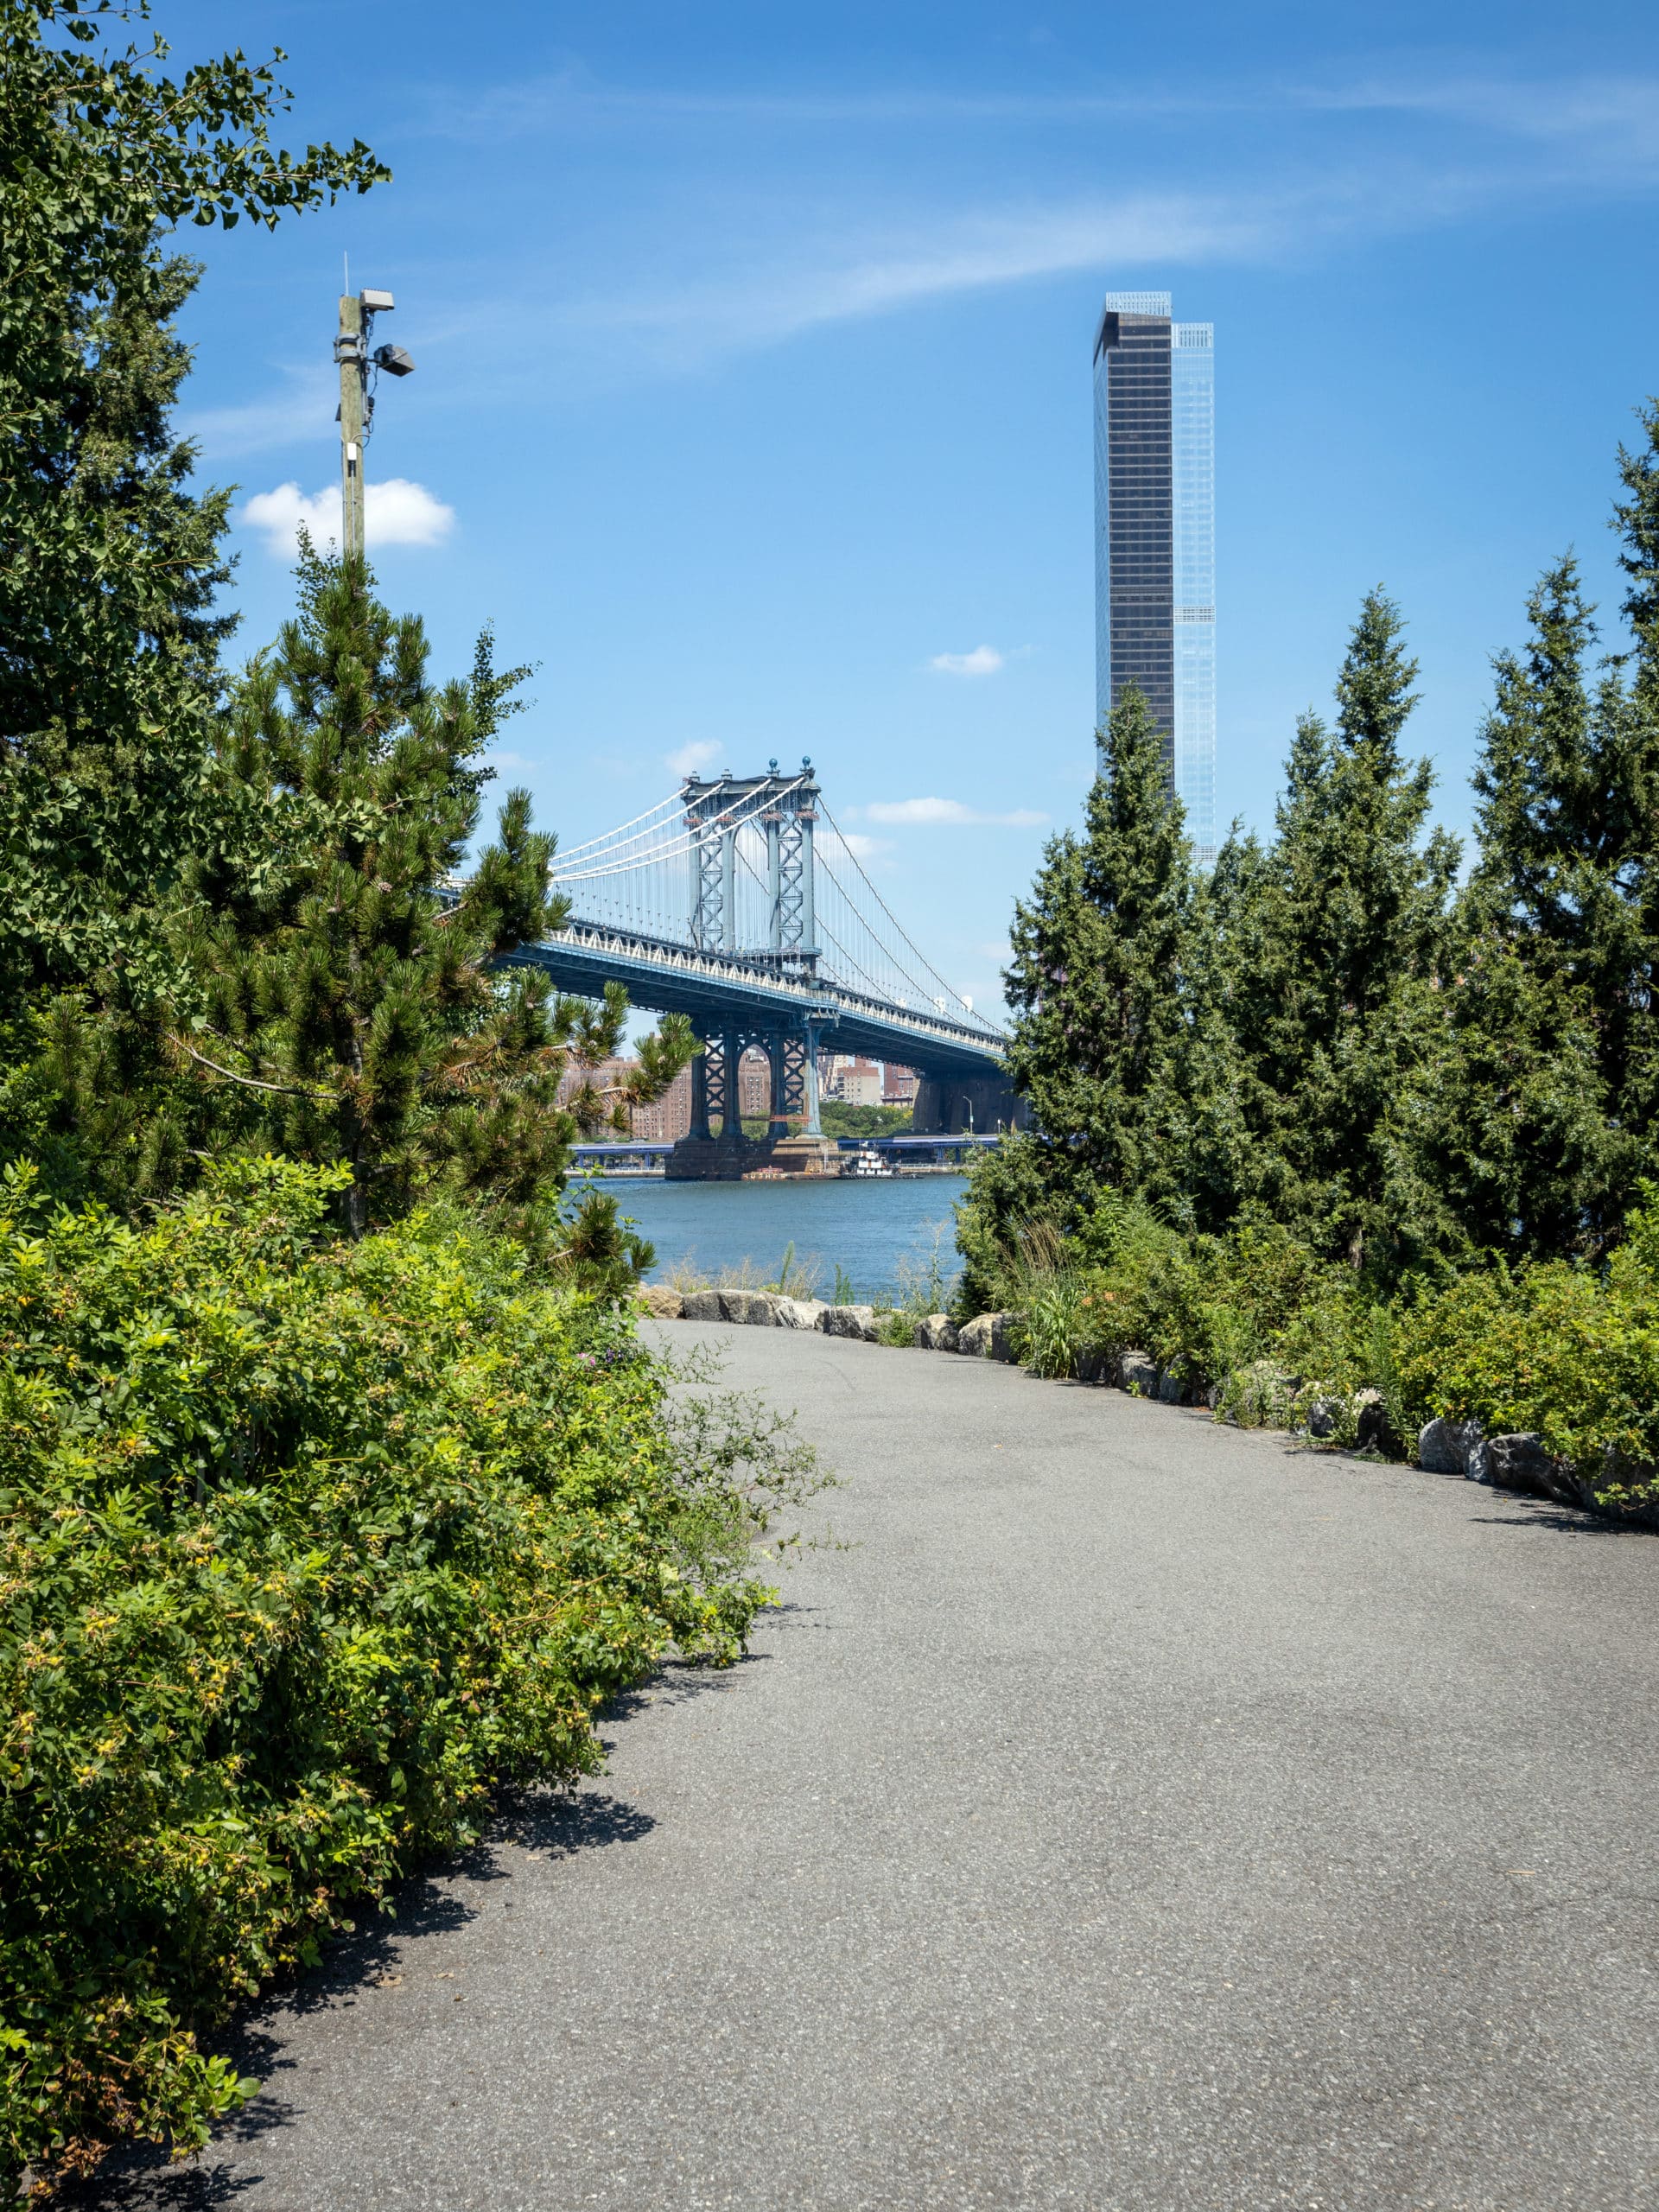 Tree-lined pathway at John Street on a sunny day. The Manhattan Bridge and One Manhattan Square are seen in the distance.